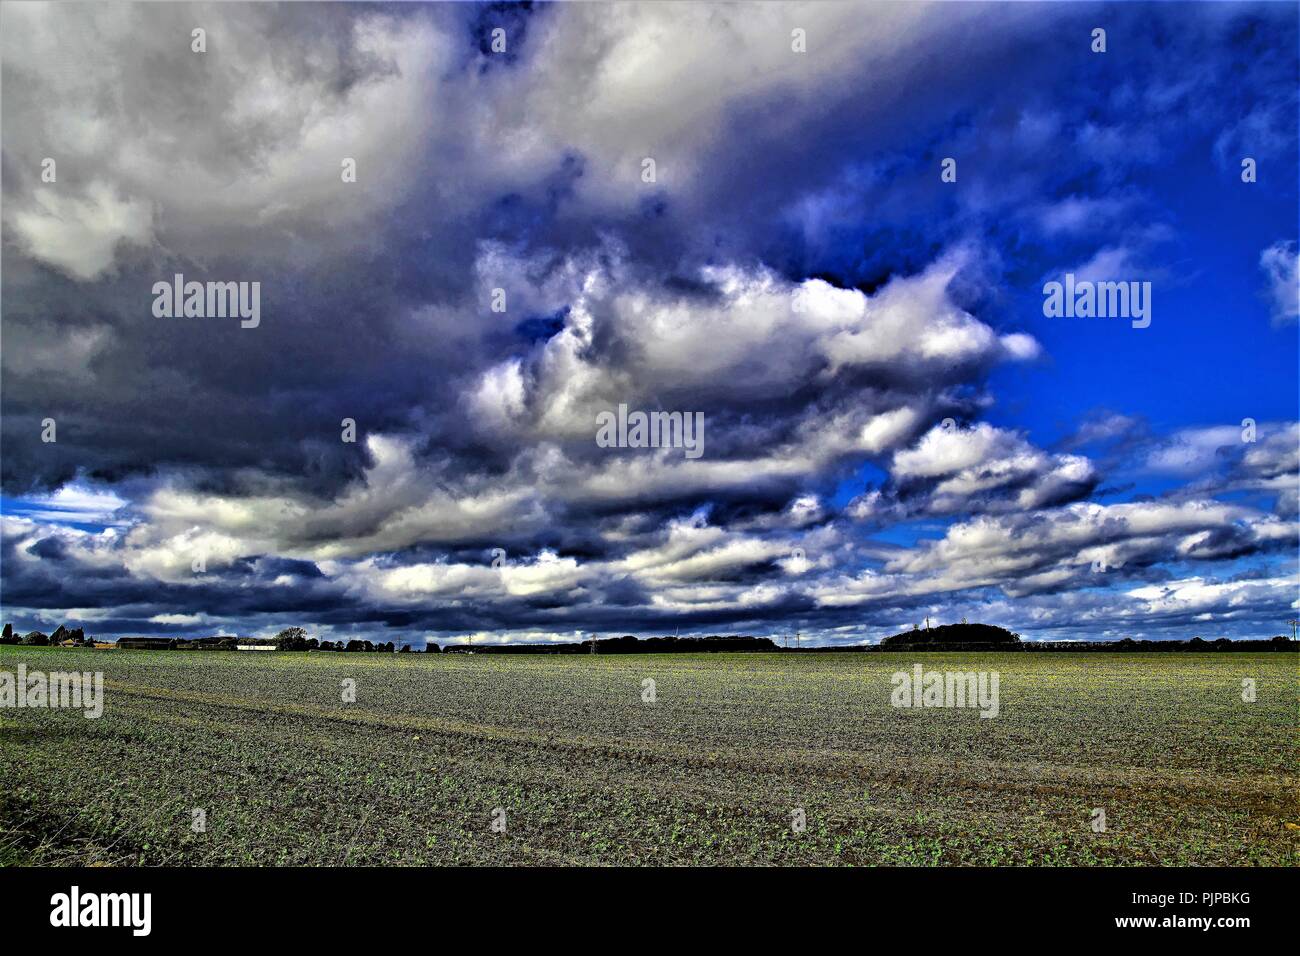 Summer cloud bursts over Sprotbrough farmland, in Doncaster, South Yorkshire, England. Stock Photo